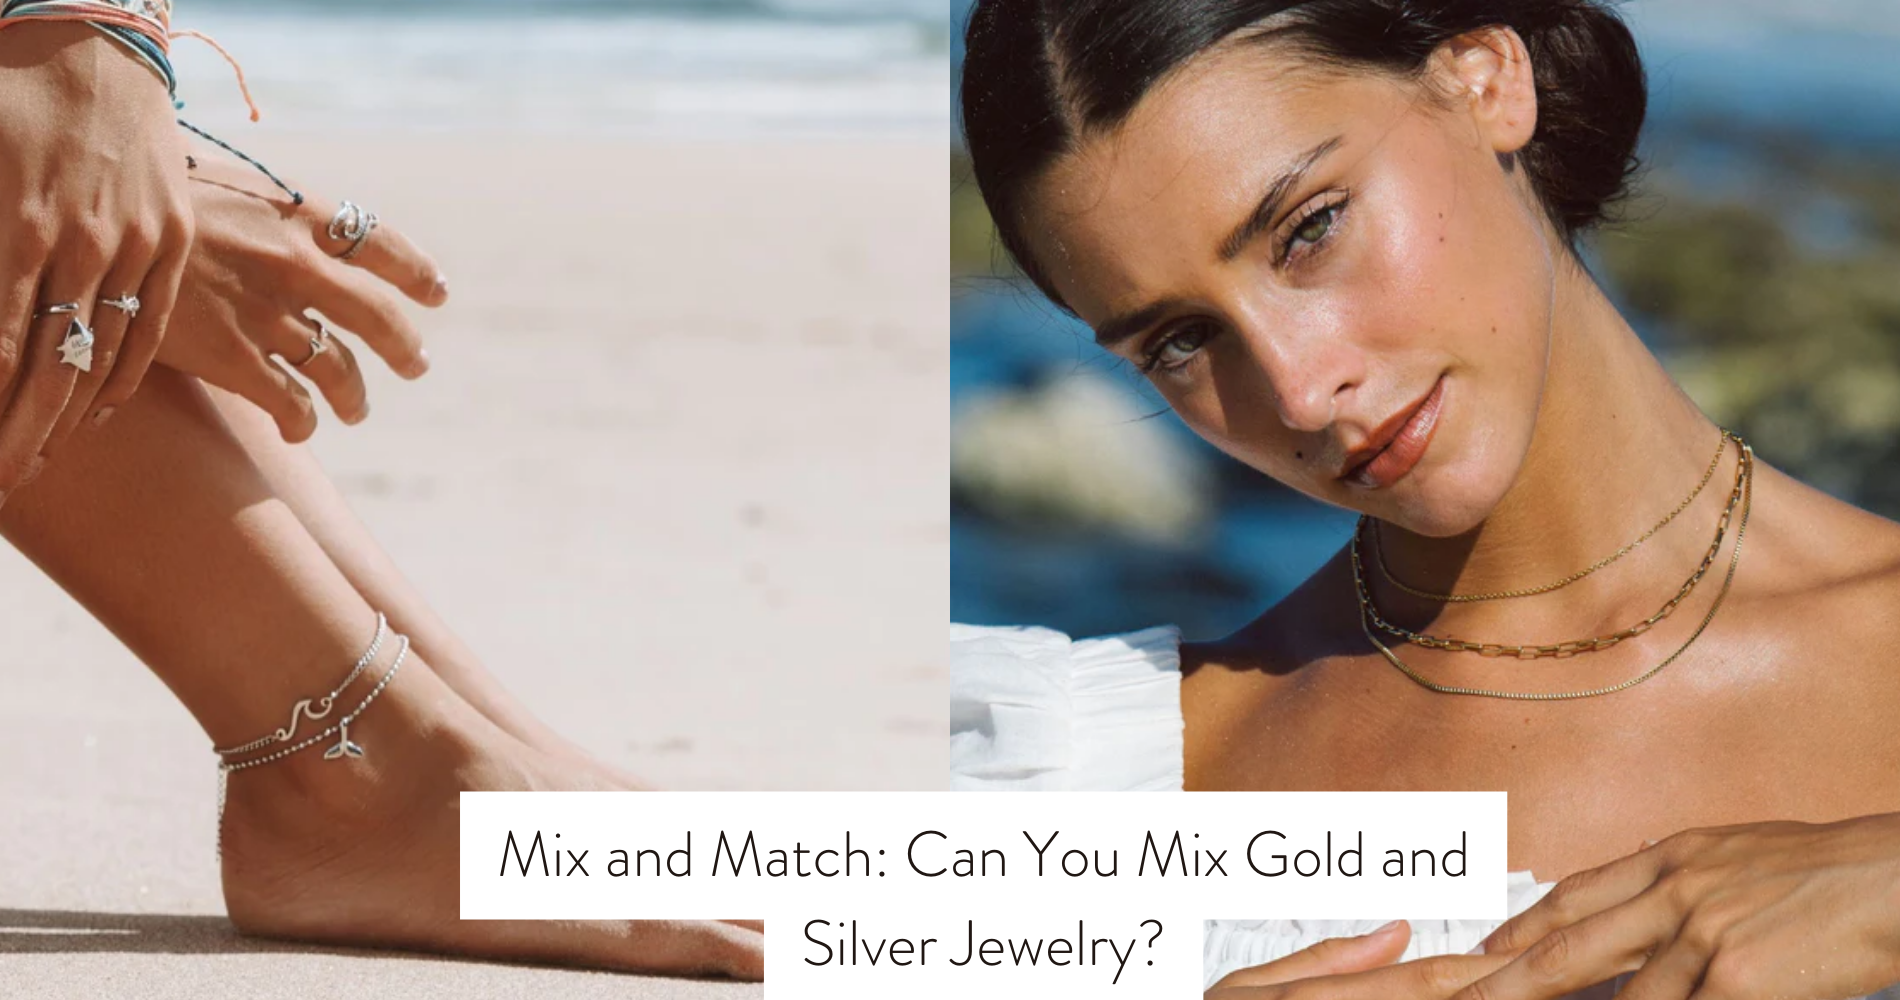 Mix and Match: Can You Mix Gold and Silver Jewelry?